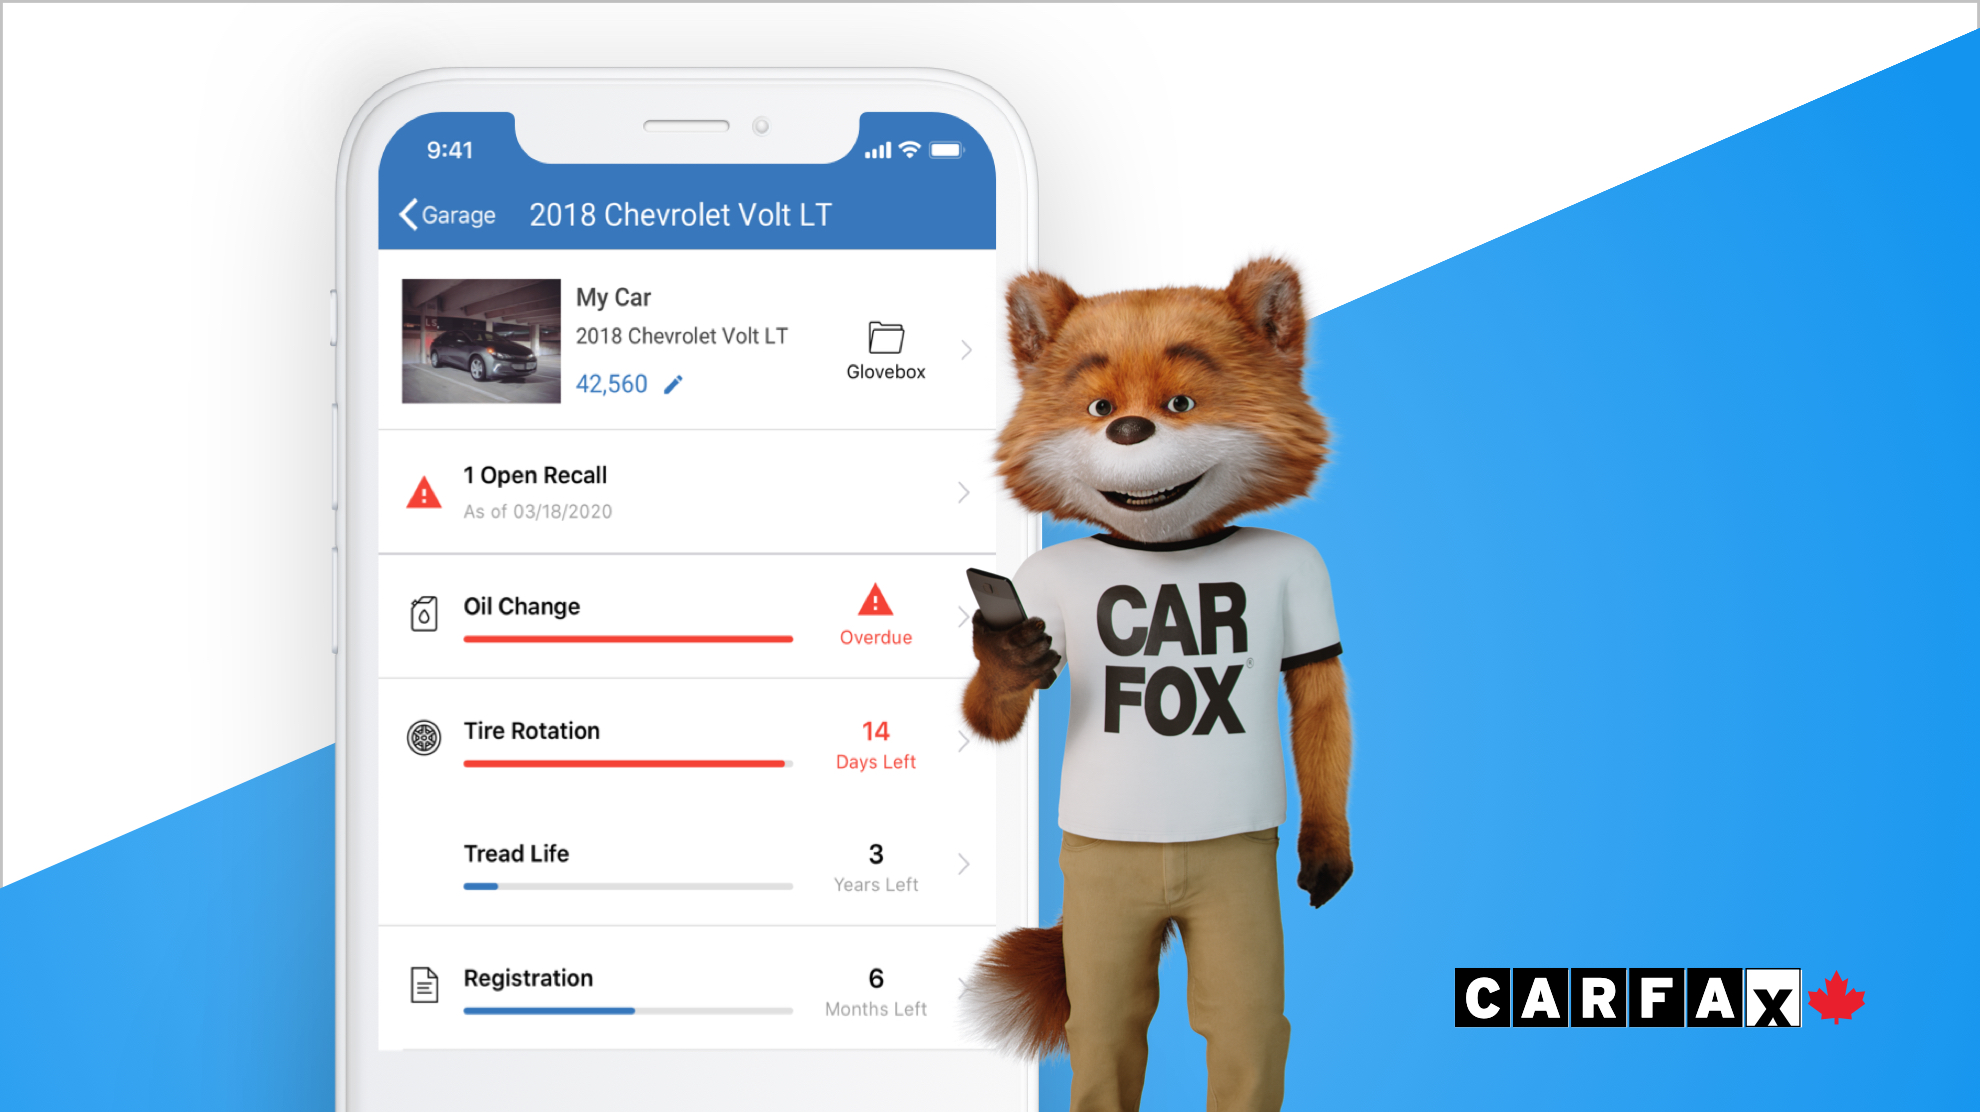 CARFAX Canada’s mascot, CAR FOX, standing in front of the Car Care app displayed on a mobile phone.